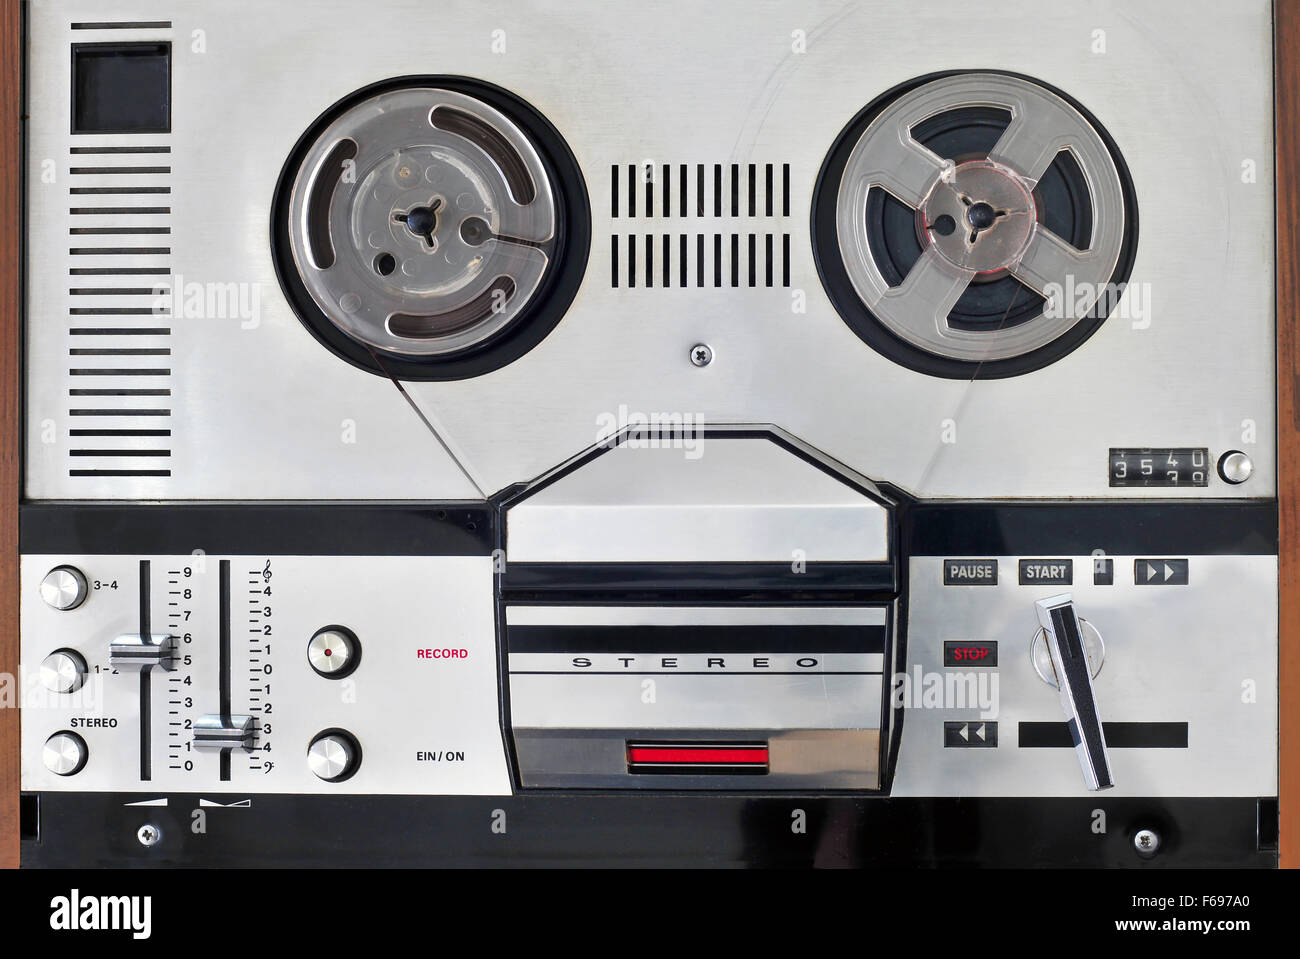 https://c8.alamy.com/comp/F697A0/photo-of-old-reel-to-reel-tape-player-F697A0.jpg